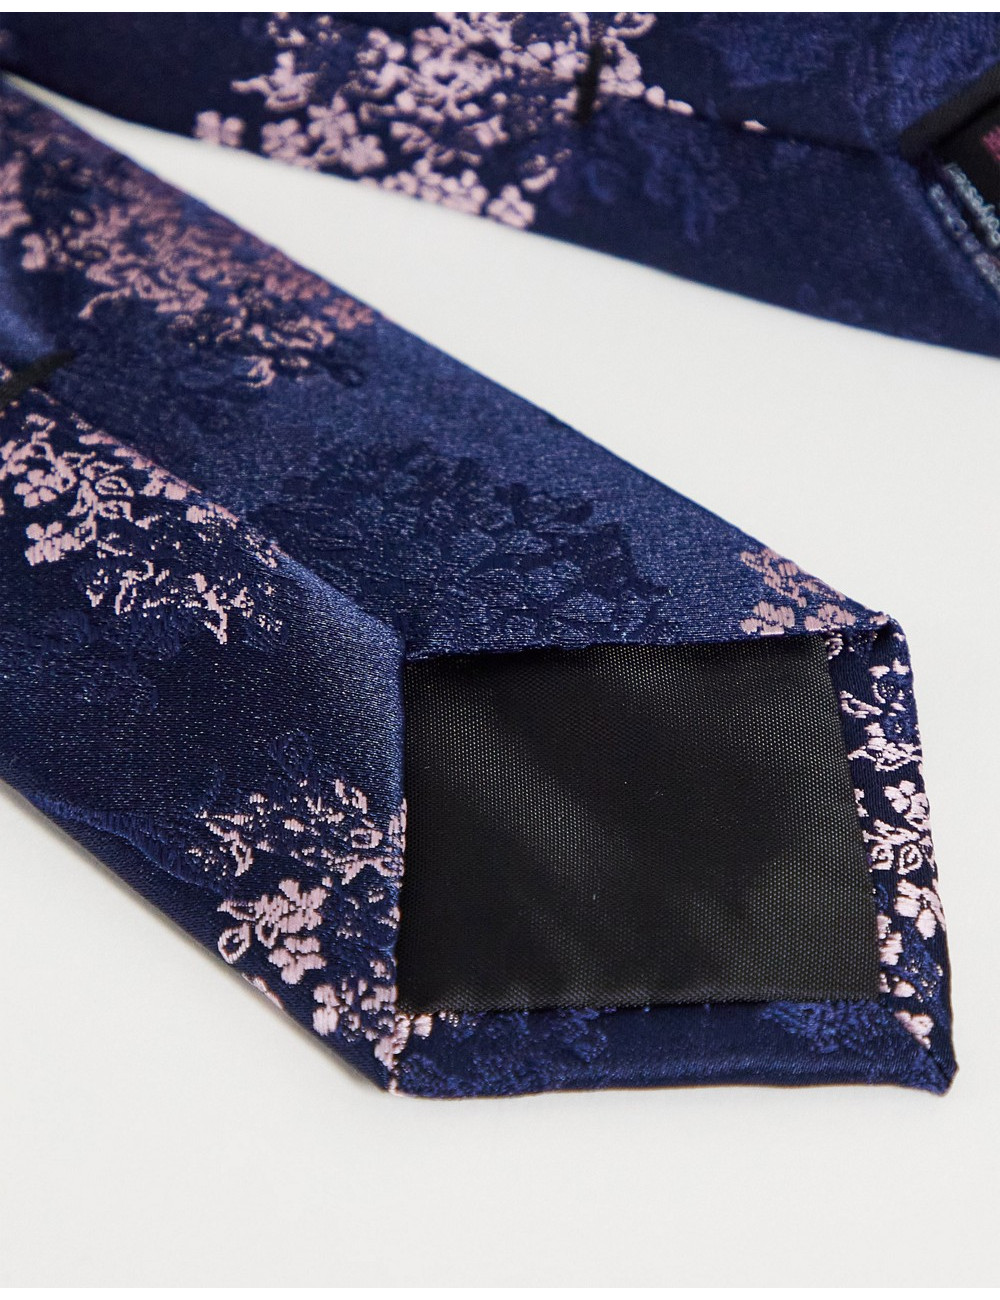 Burton china floral tie and...